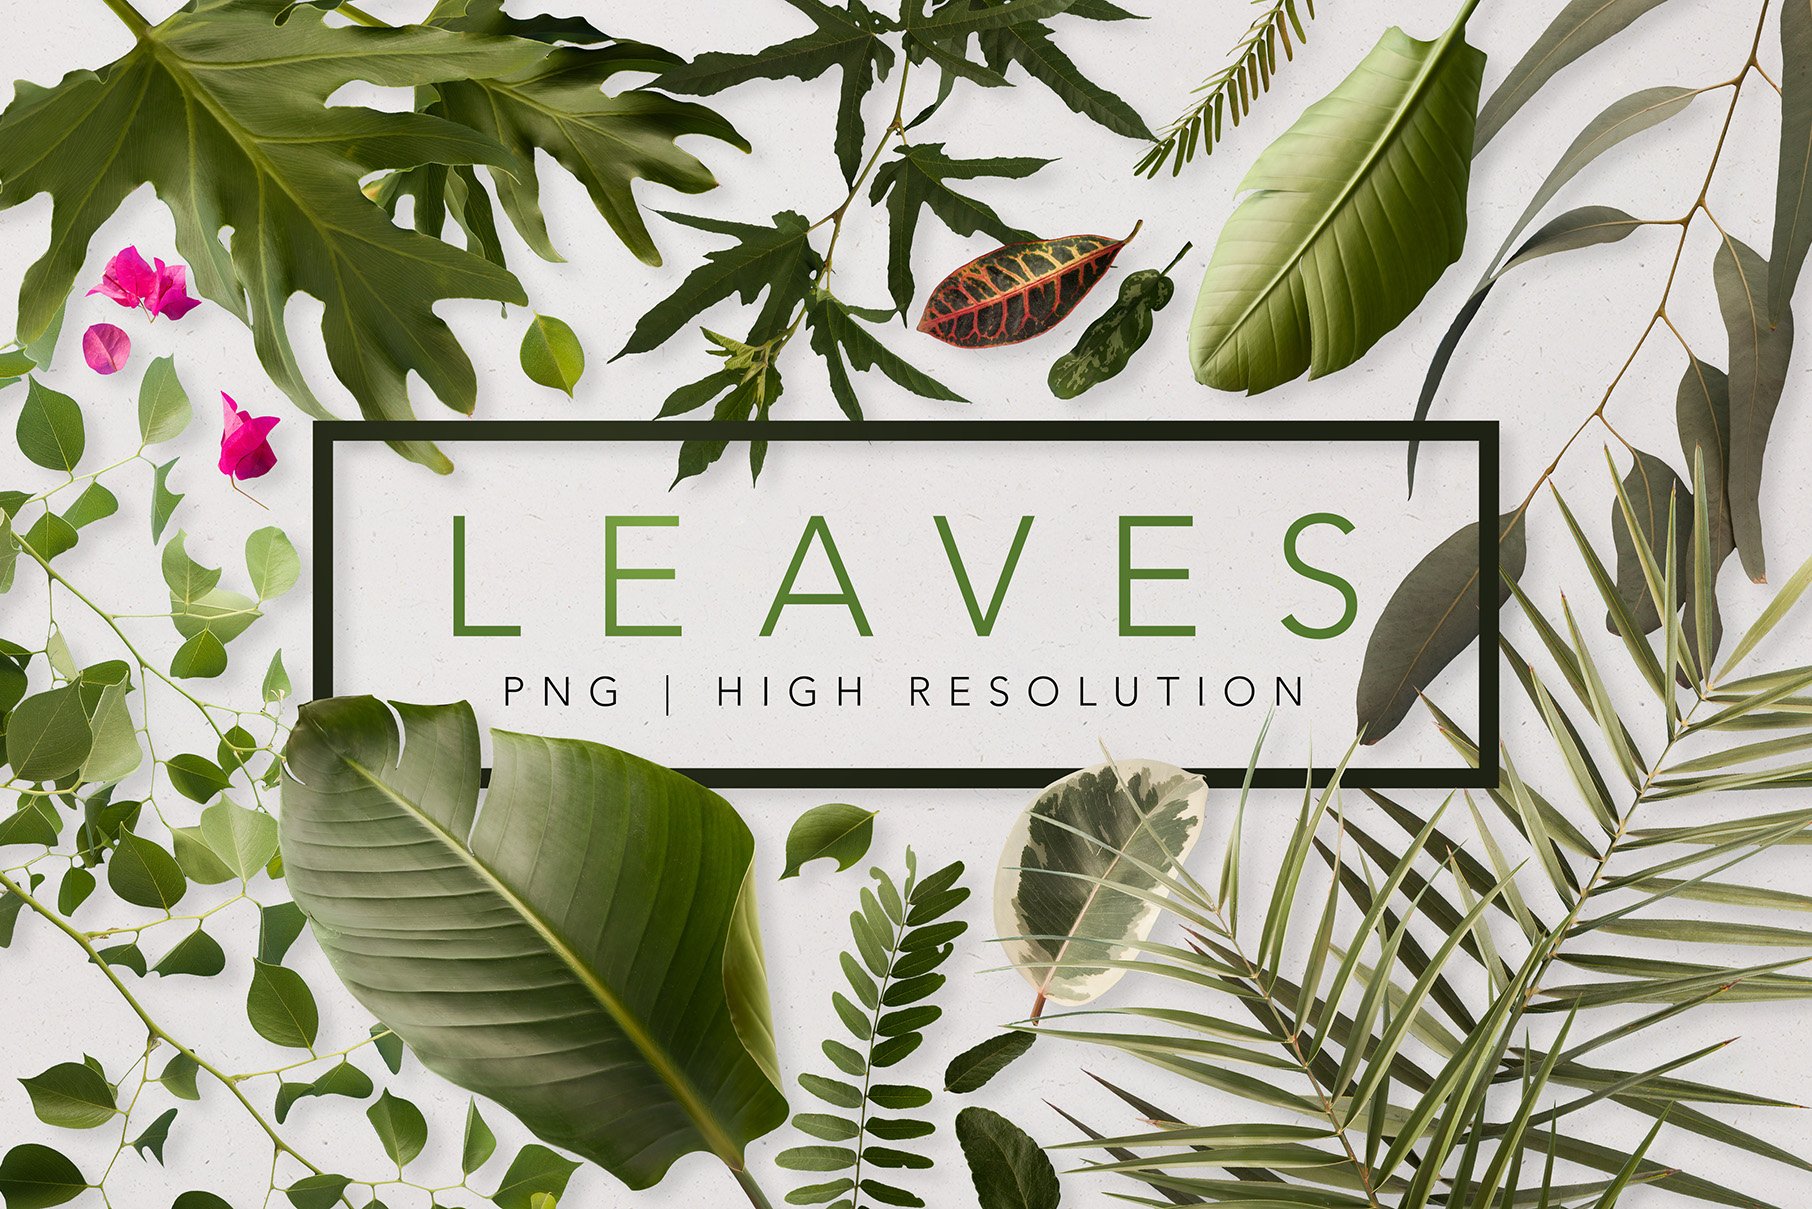 Real Leaves - Green Cutout Leaf cover image.